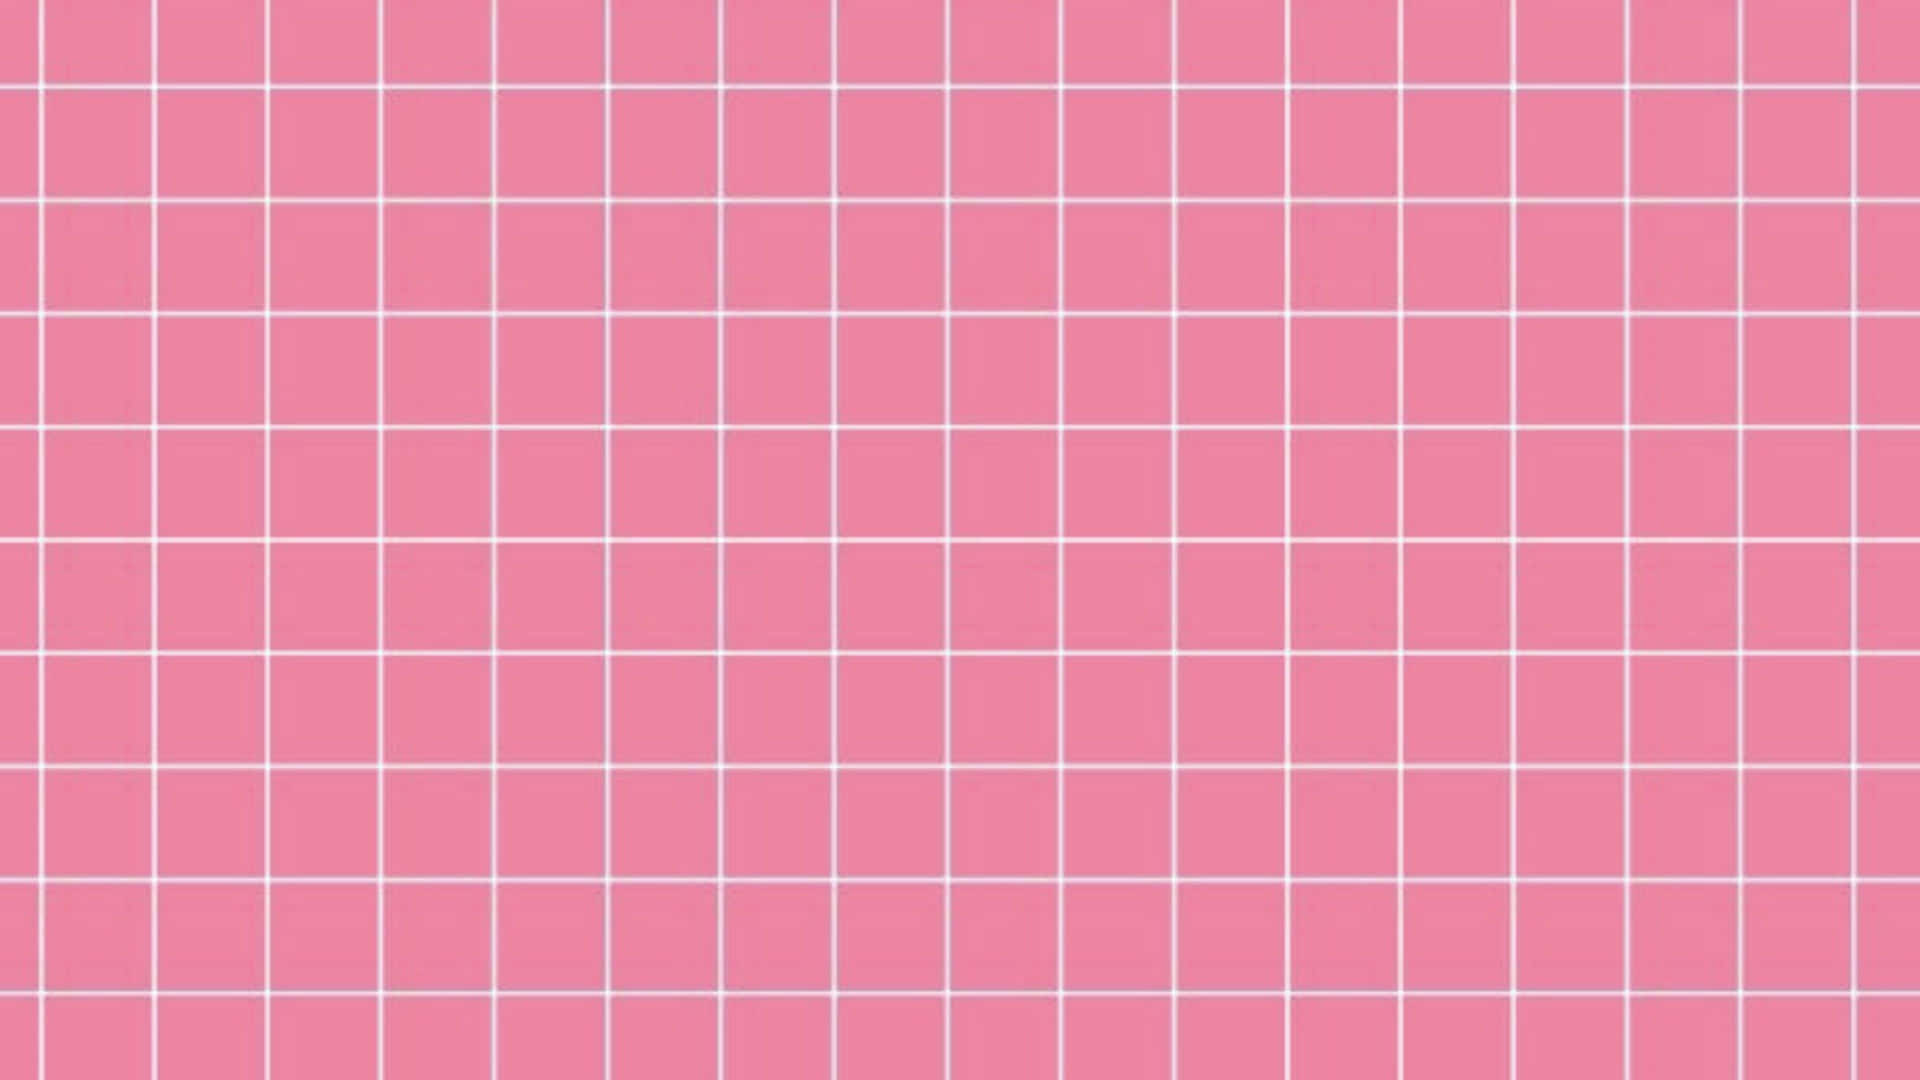 Abstract Grid with Soft Pastel Colors